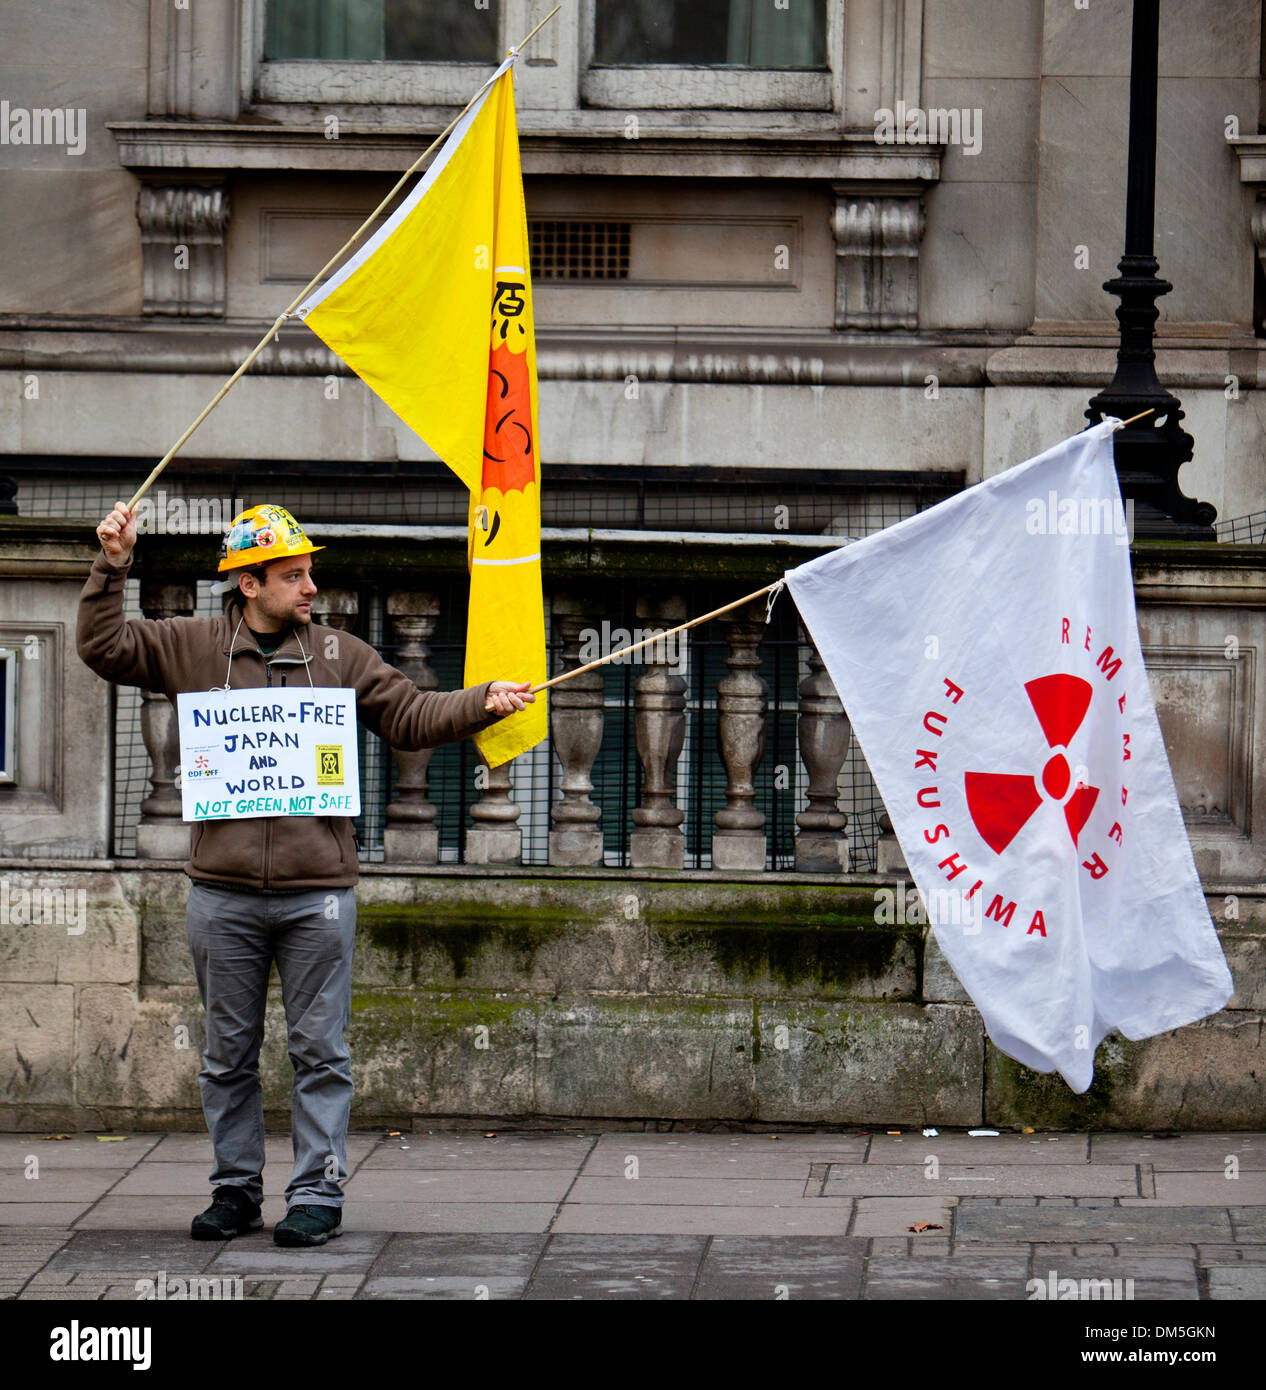 LONDON - DEC 21: An anti nuclear protester for the Fukushima Daiichi disaster stands outside the Japanese London embassy in the United Kingdom Stock Photo